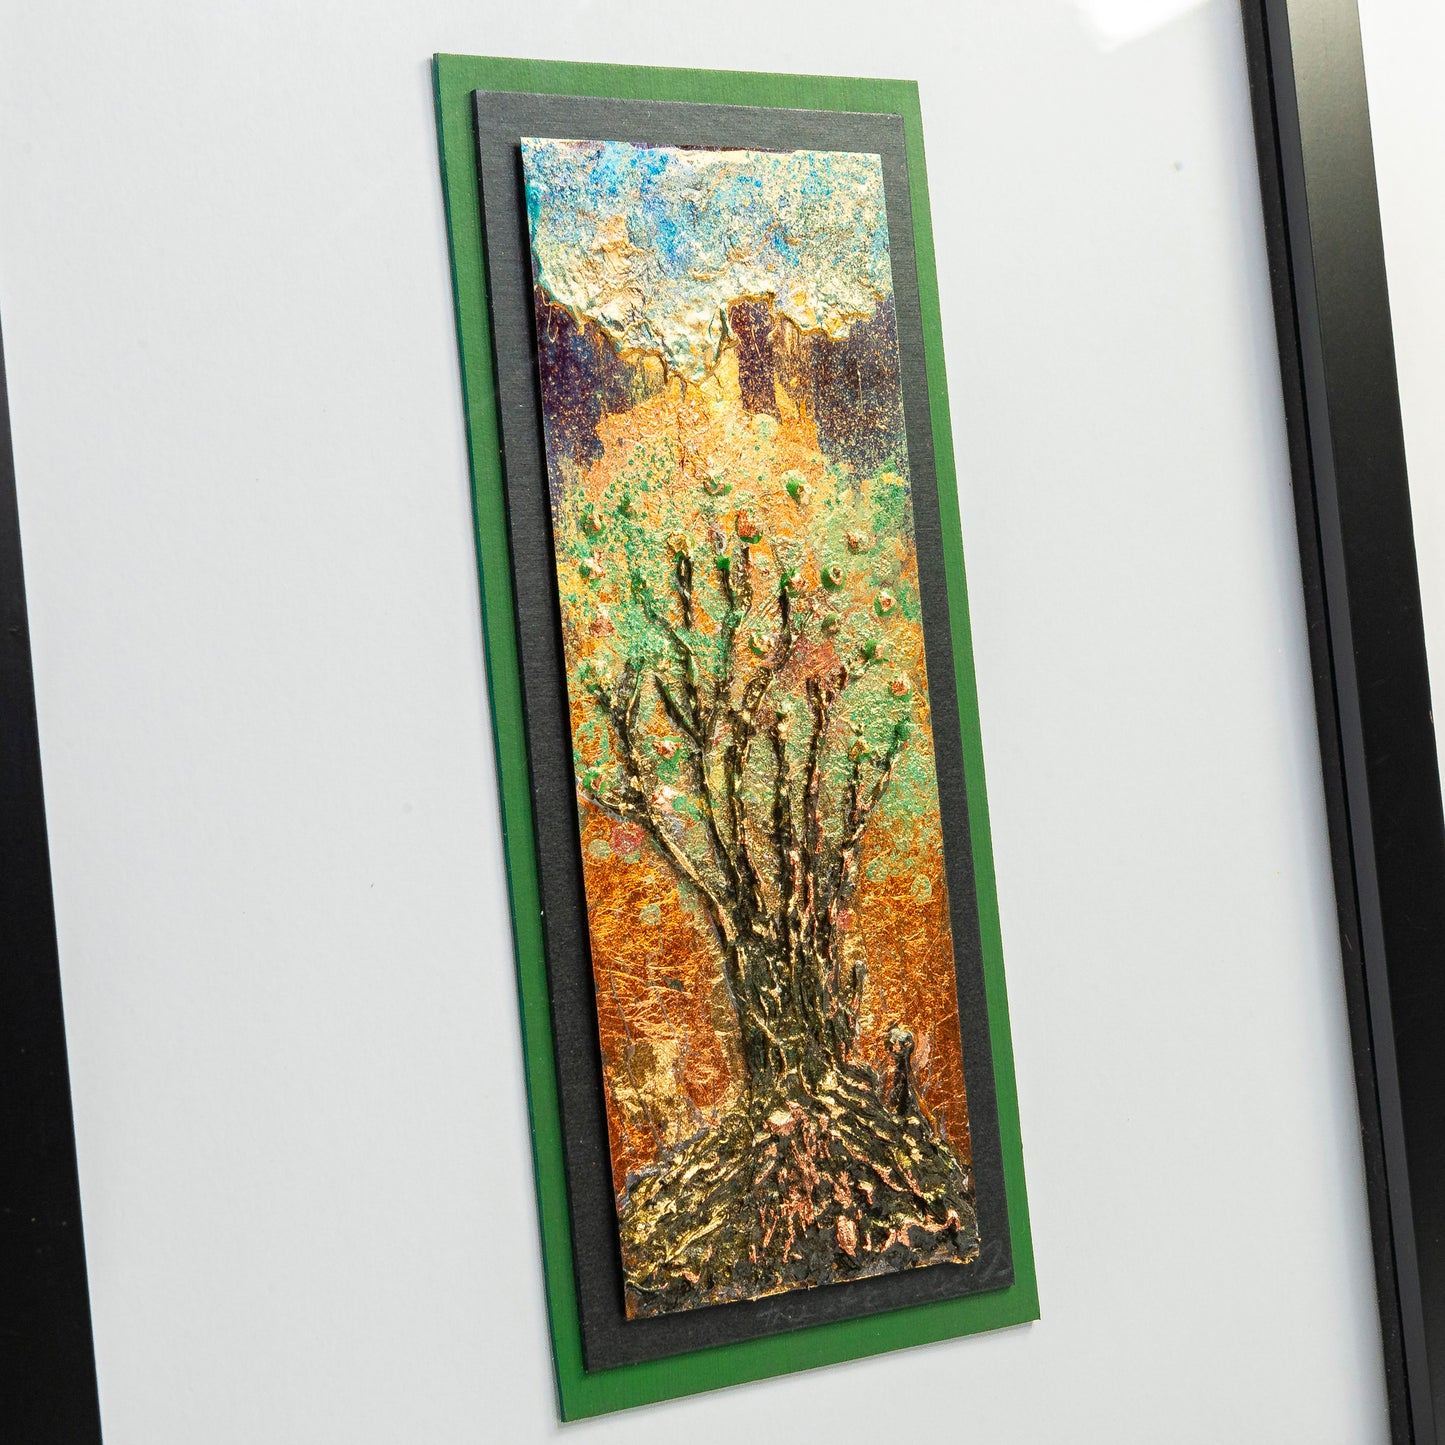 Tree of Knowledge, 11x14" Framed